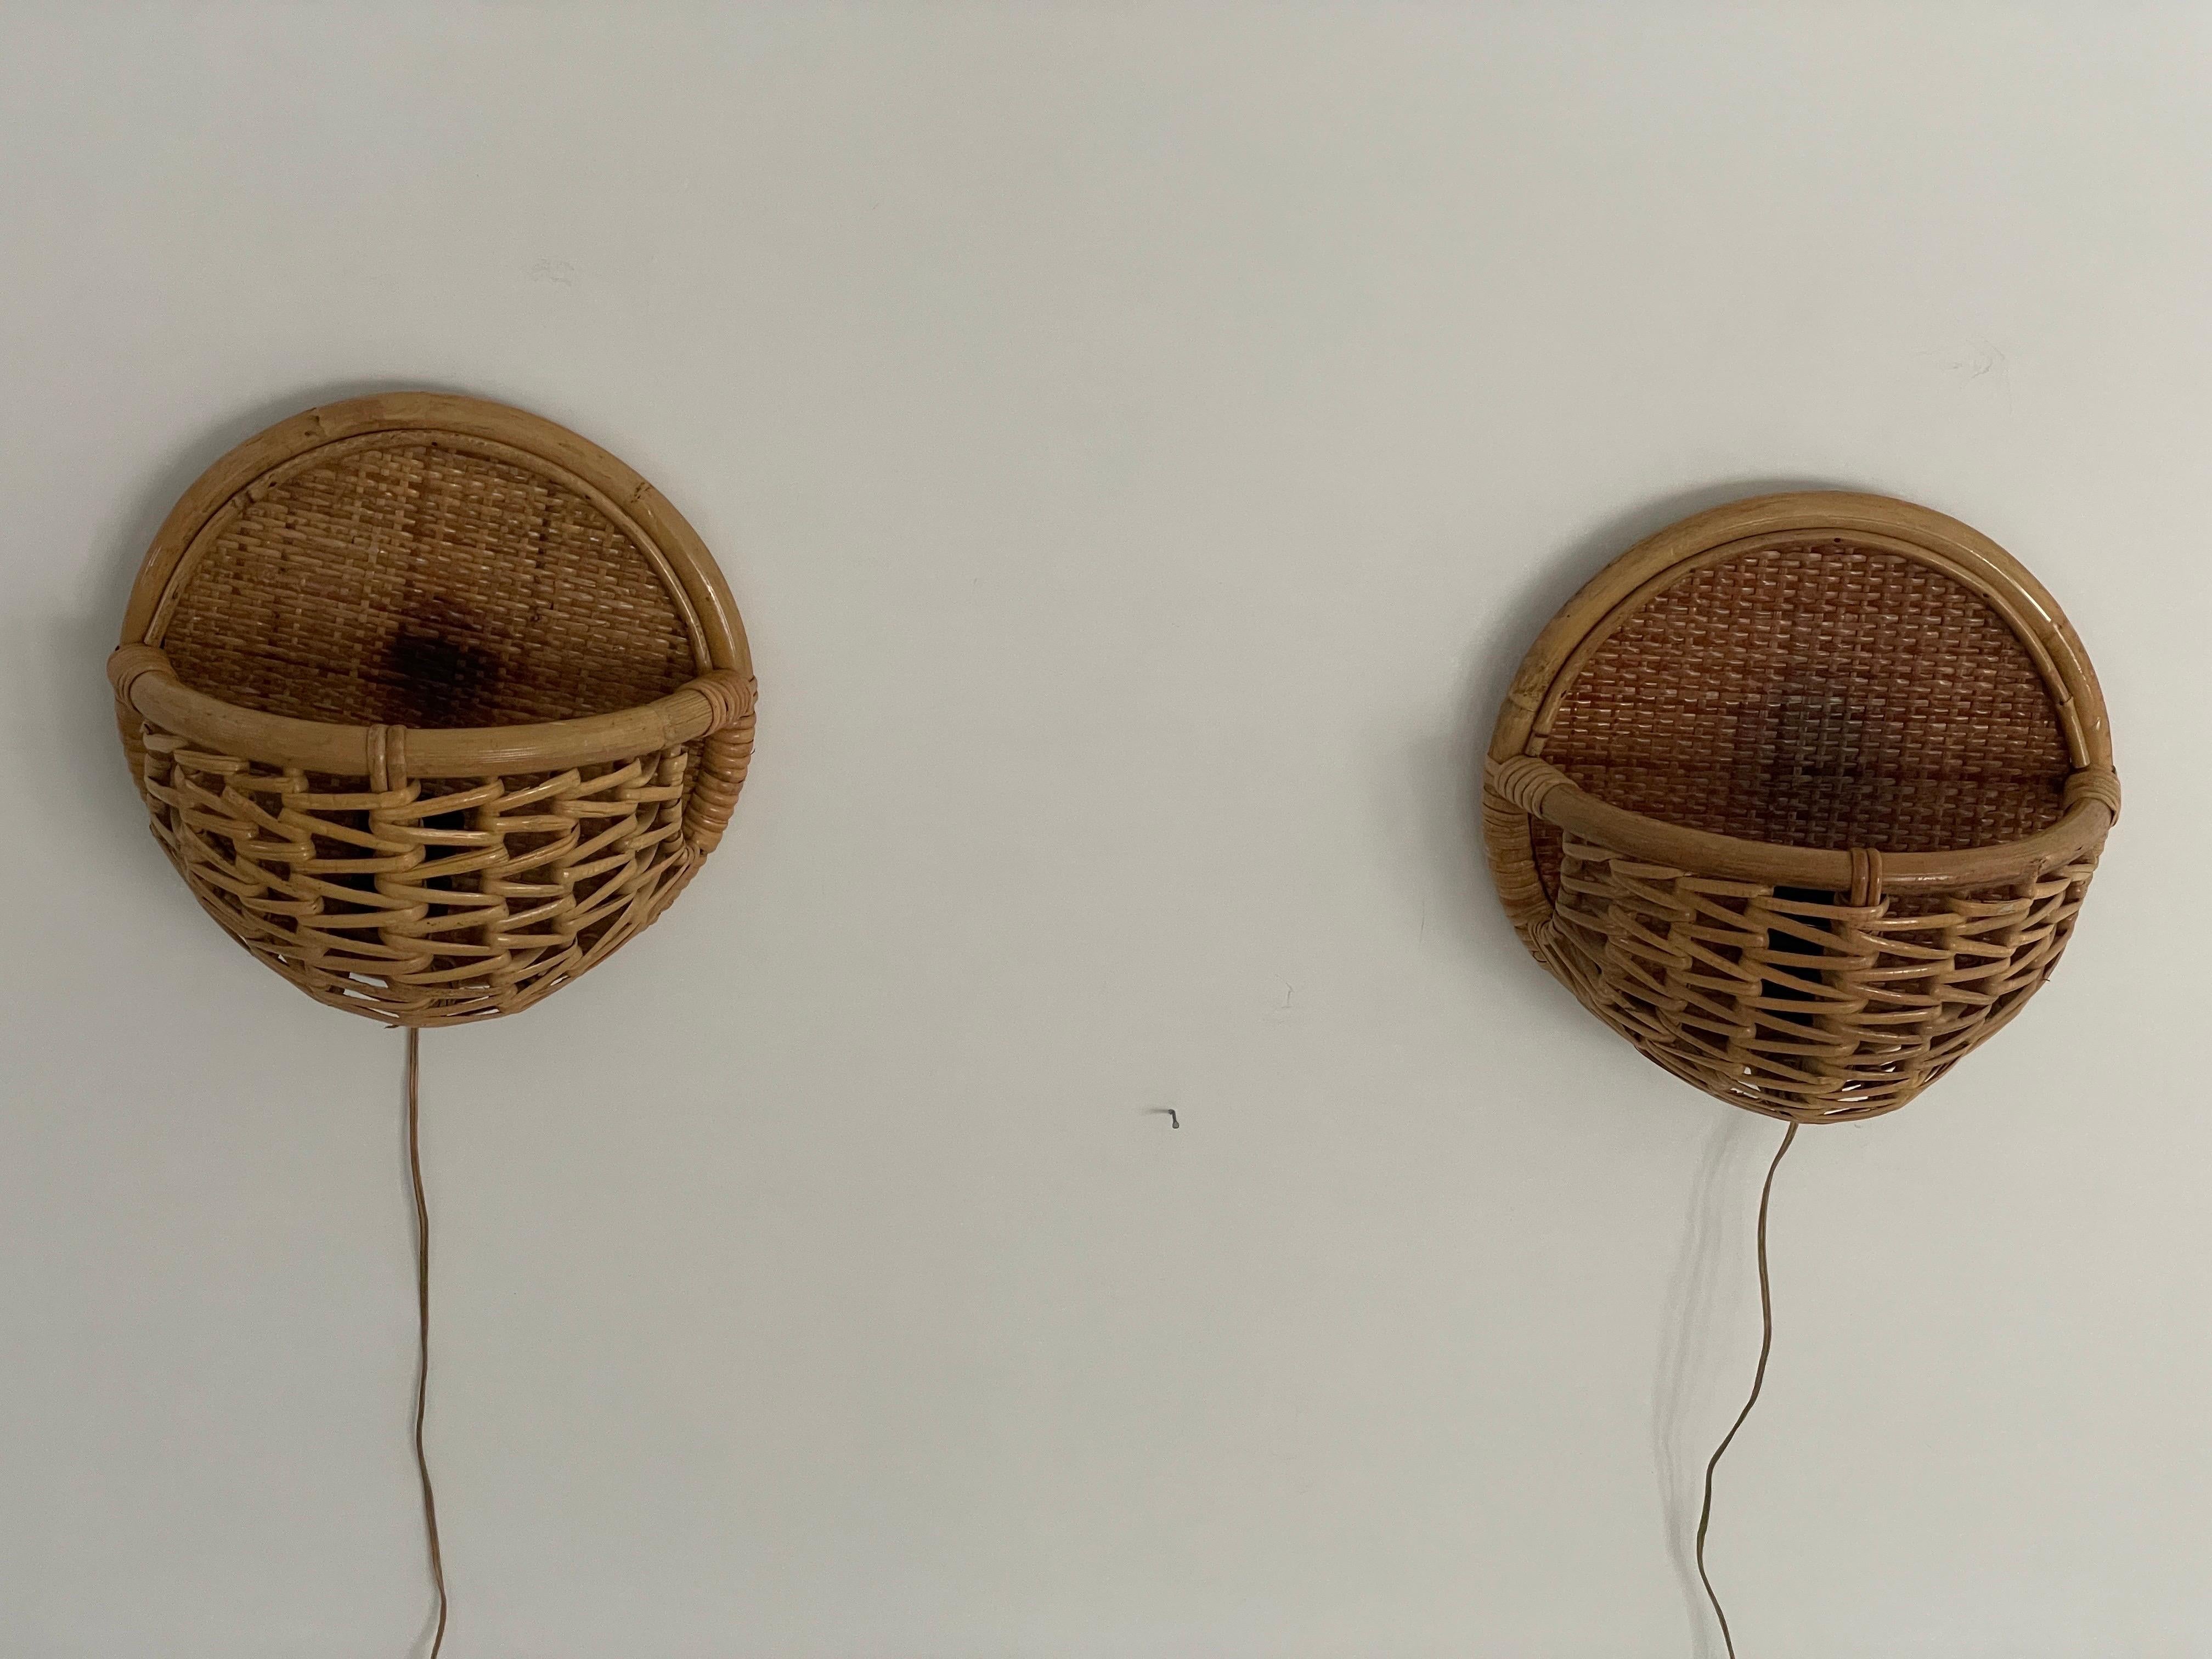 Mid-Century Modern Wicker and Bamboo Round Design Pair of Wall Lamps, 1950s, Italy For Sale